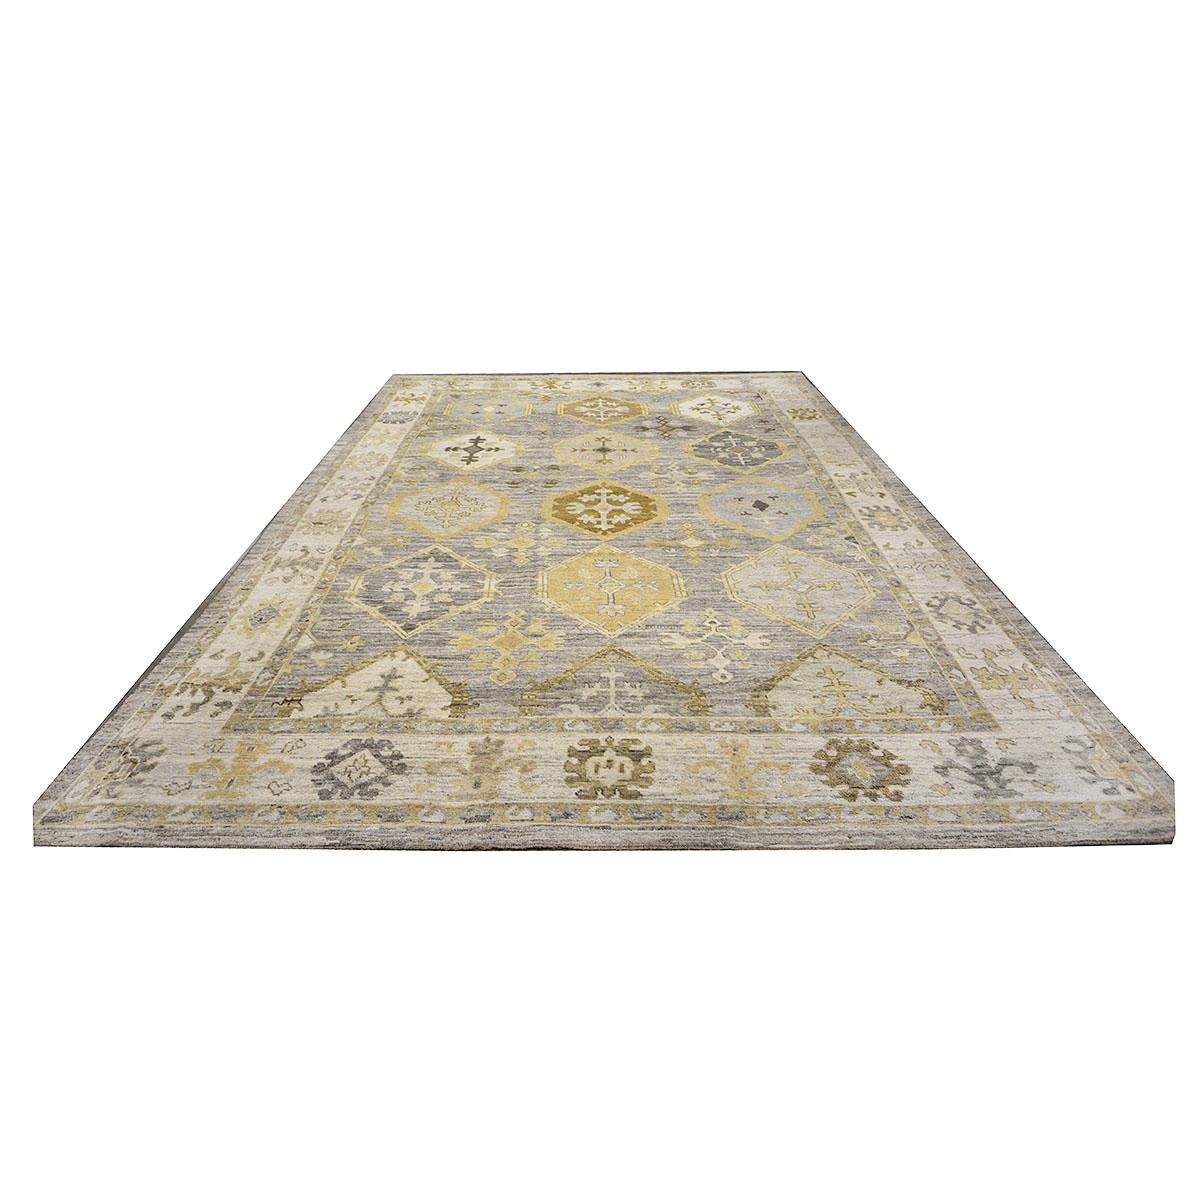   Ashly Fine Rugs presents a 21st-century Turkish Oushak 11x15 Handmade Area Rug. Oushak weavings began in a location just south of Istanbul, in a region that was to become the rugs namesake, Oushak. Although nomads first produced the rugs for